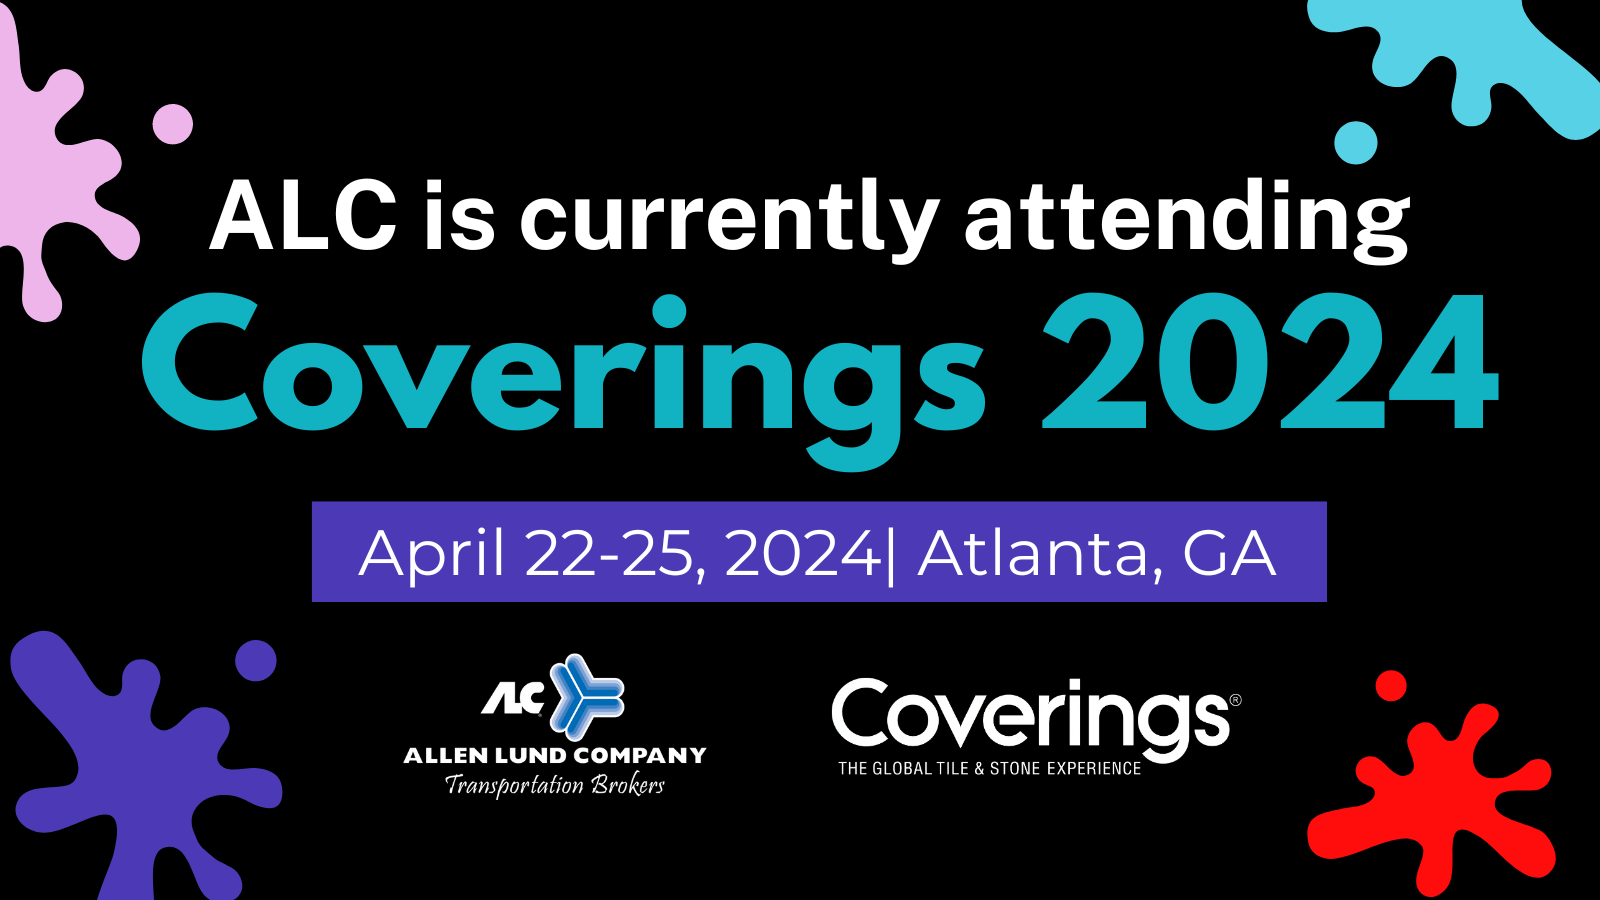 ALC is currently attending Coverings 2024